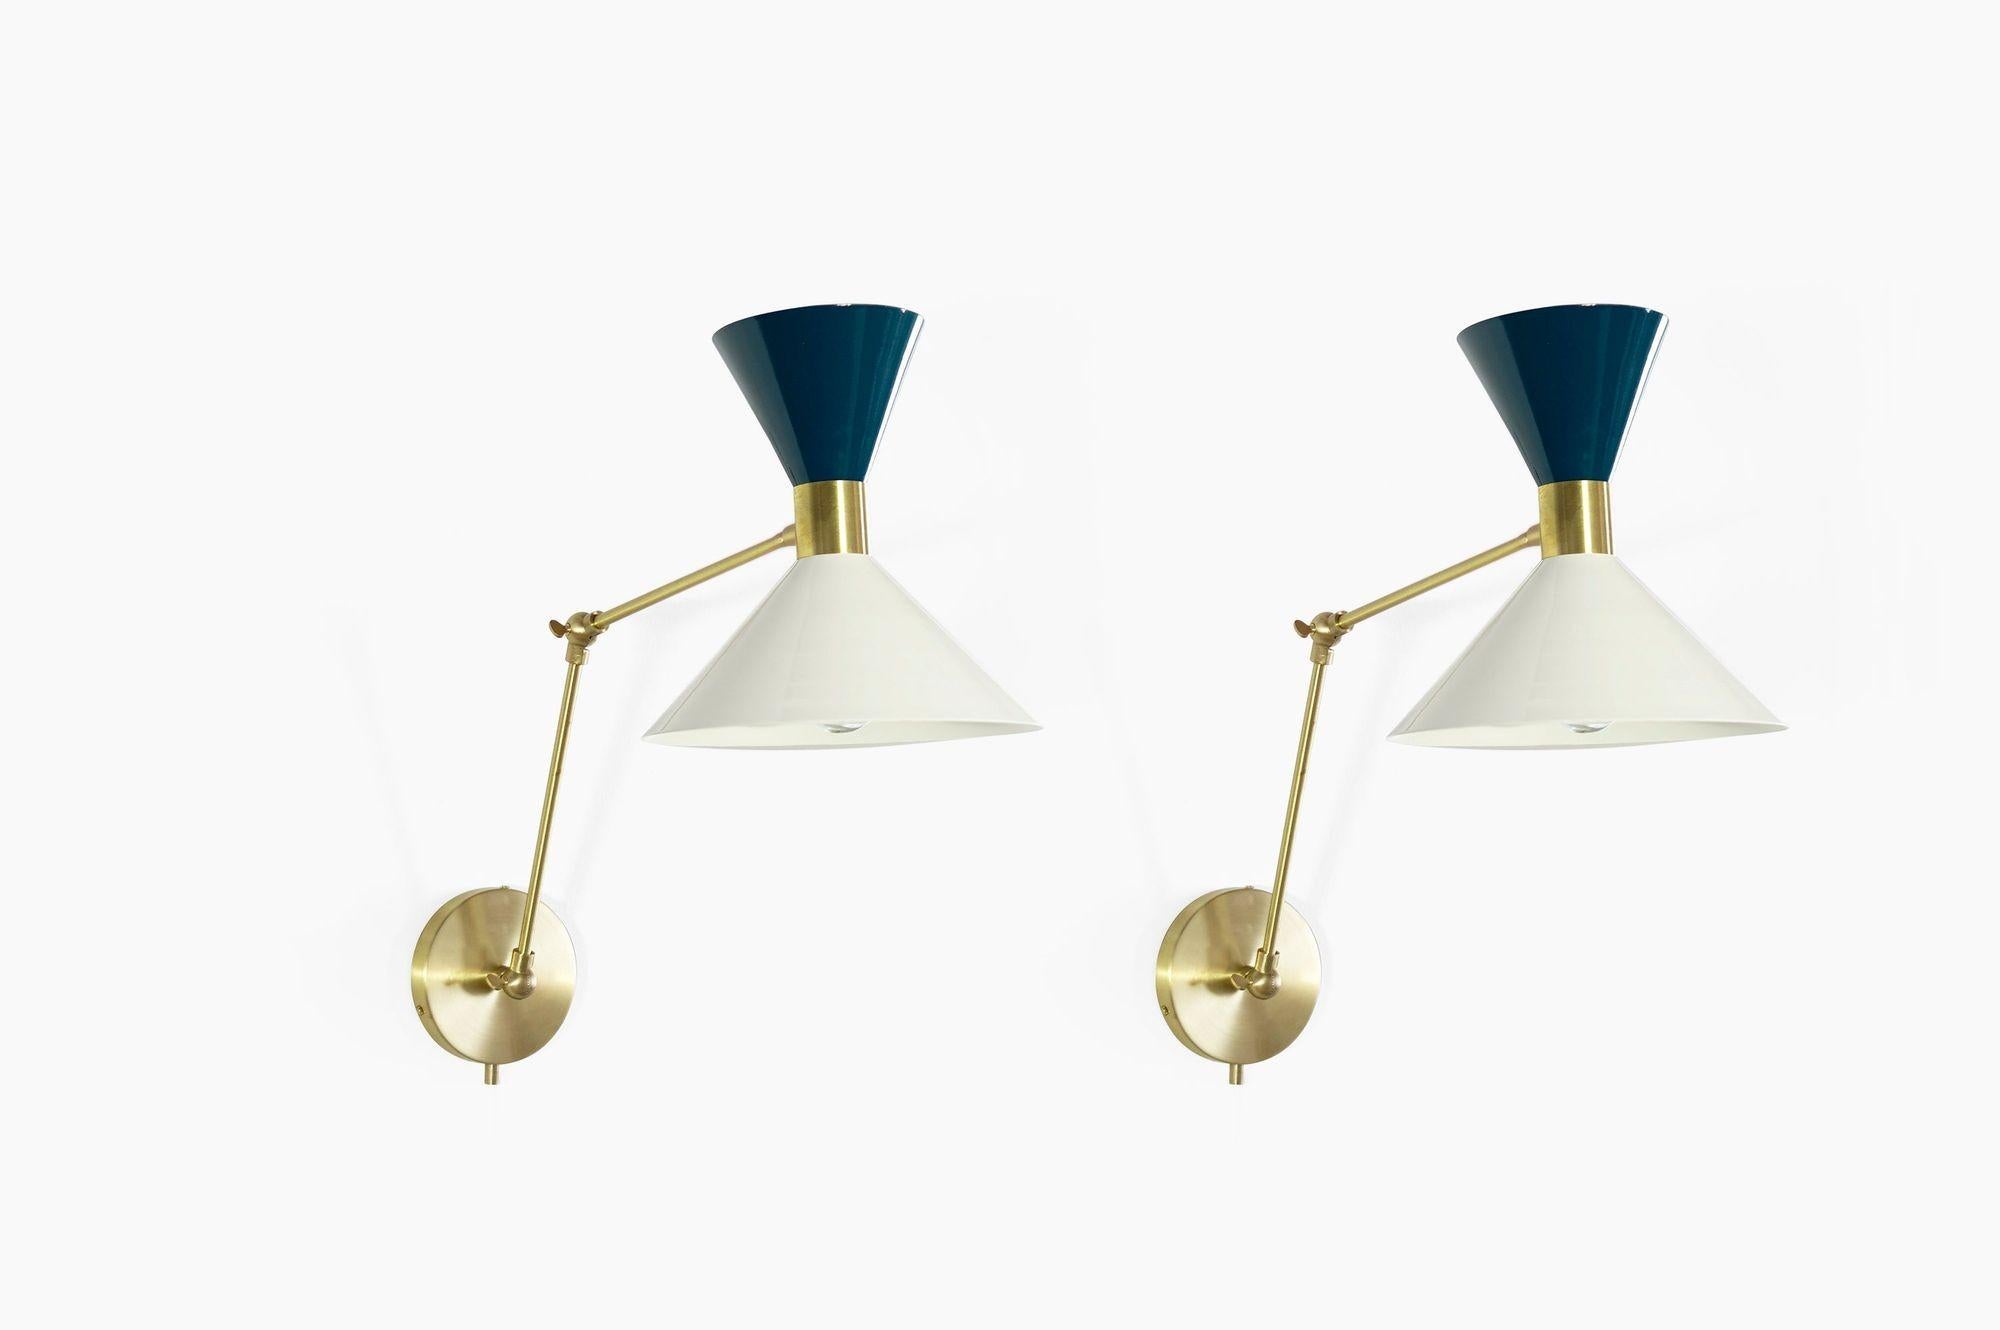 Monarch is a large scale wall-mount reading lamp or sconce with articulated arms. The wide brass band and dramatically scaled flared cone makes the Monarch a strong design statement. Swiveling head allows for cone adjustment. Arms articulate at both